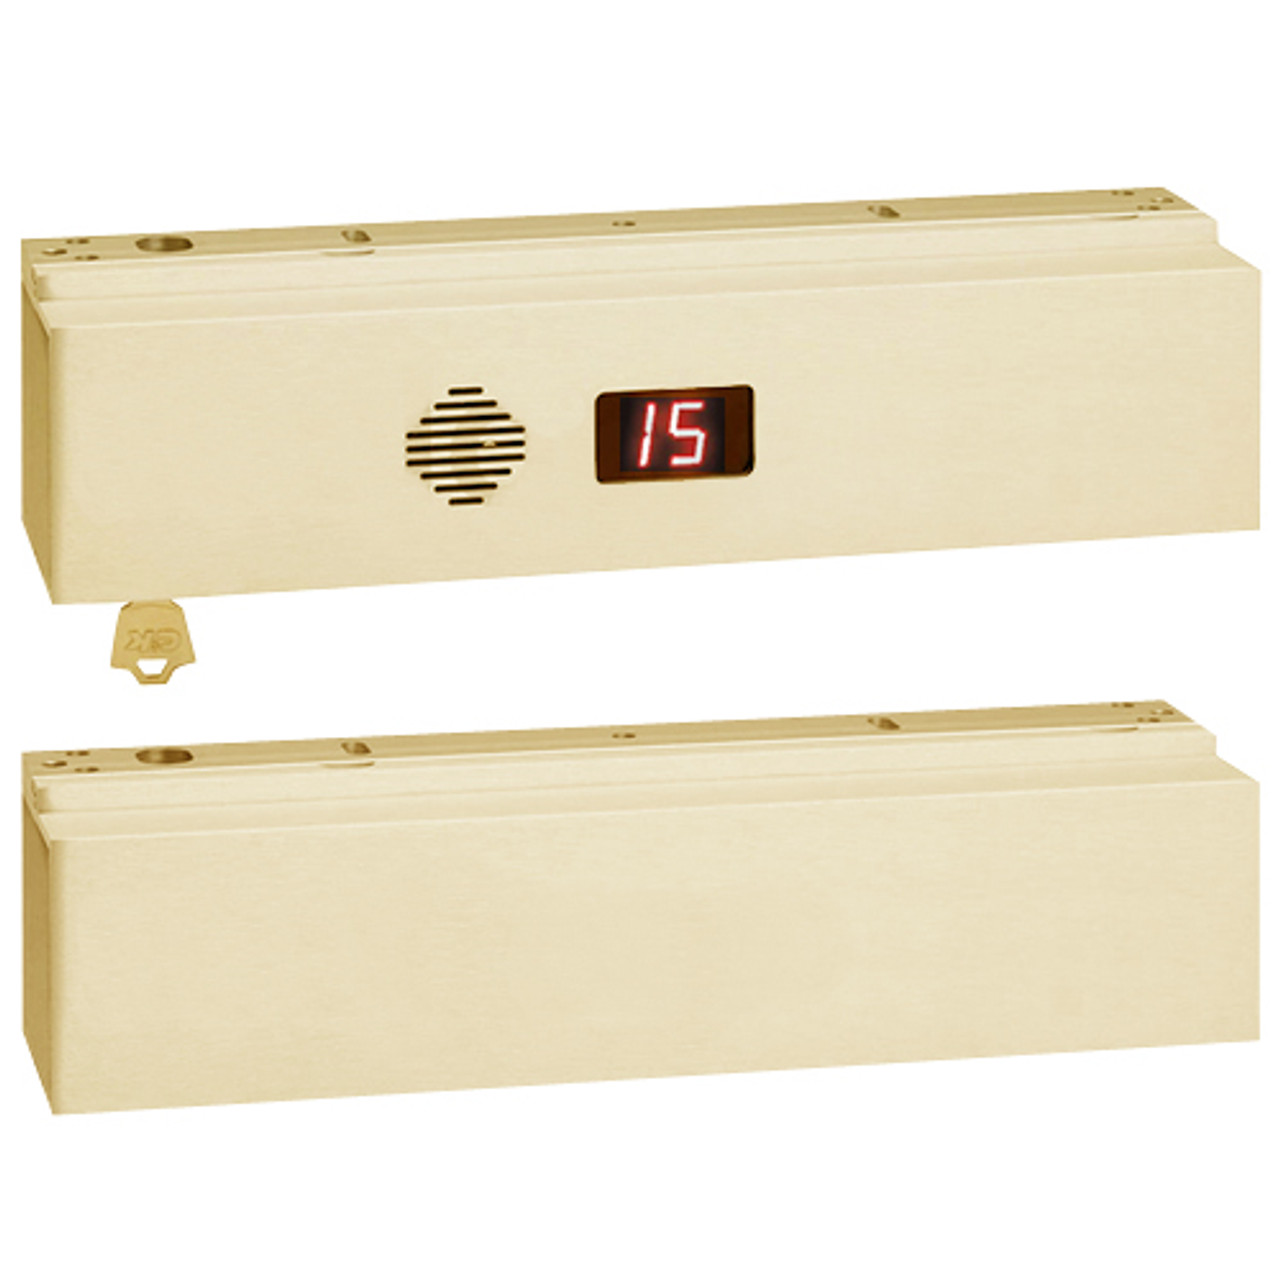 1511T-NA-K-C-B2A2 SDC 1511T Series Tandem Integrated Delayed Egress Locks with Magnetic Bond Sensor and Anti-Tamper Switch in Brass Powder